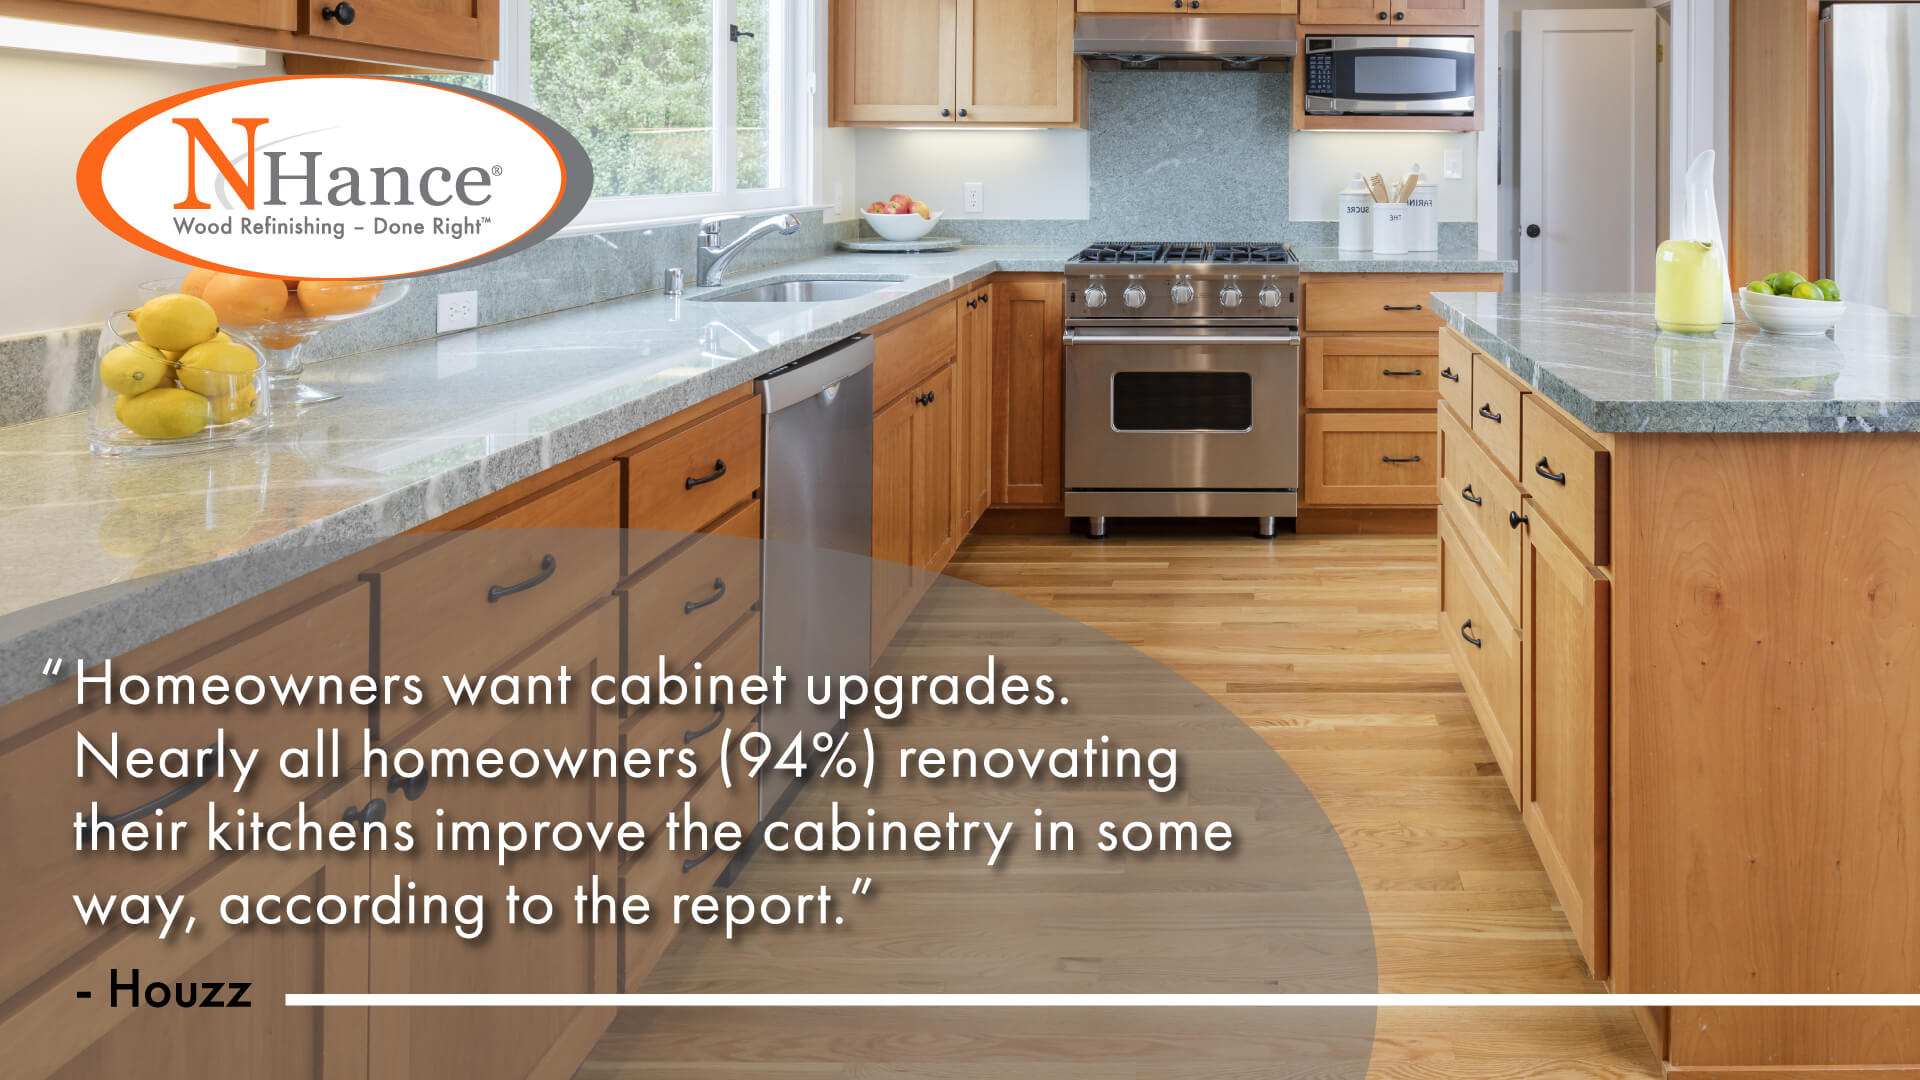 N-Hance franchise infographic about 94% of homeowners renovating their kitchens improve the cabinetry